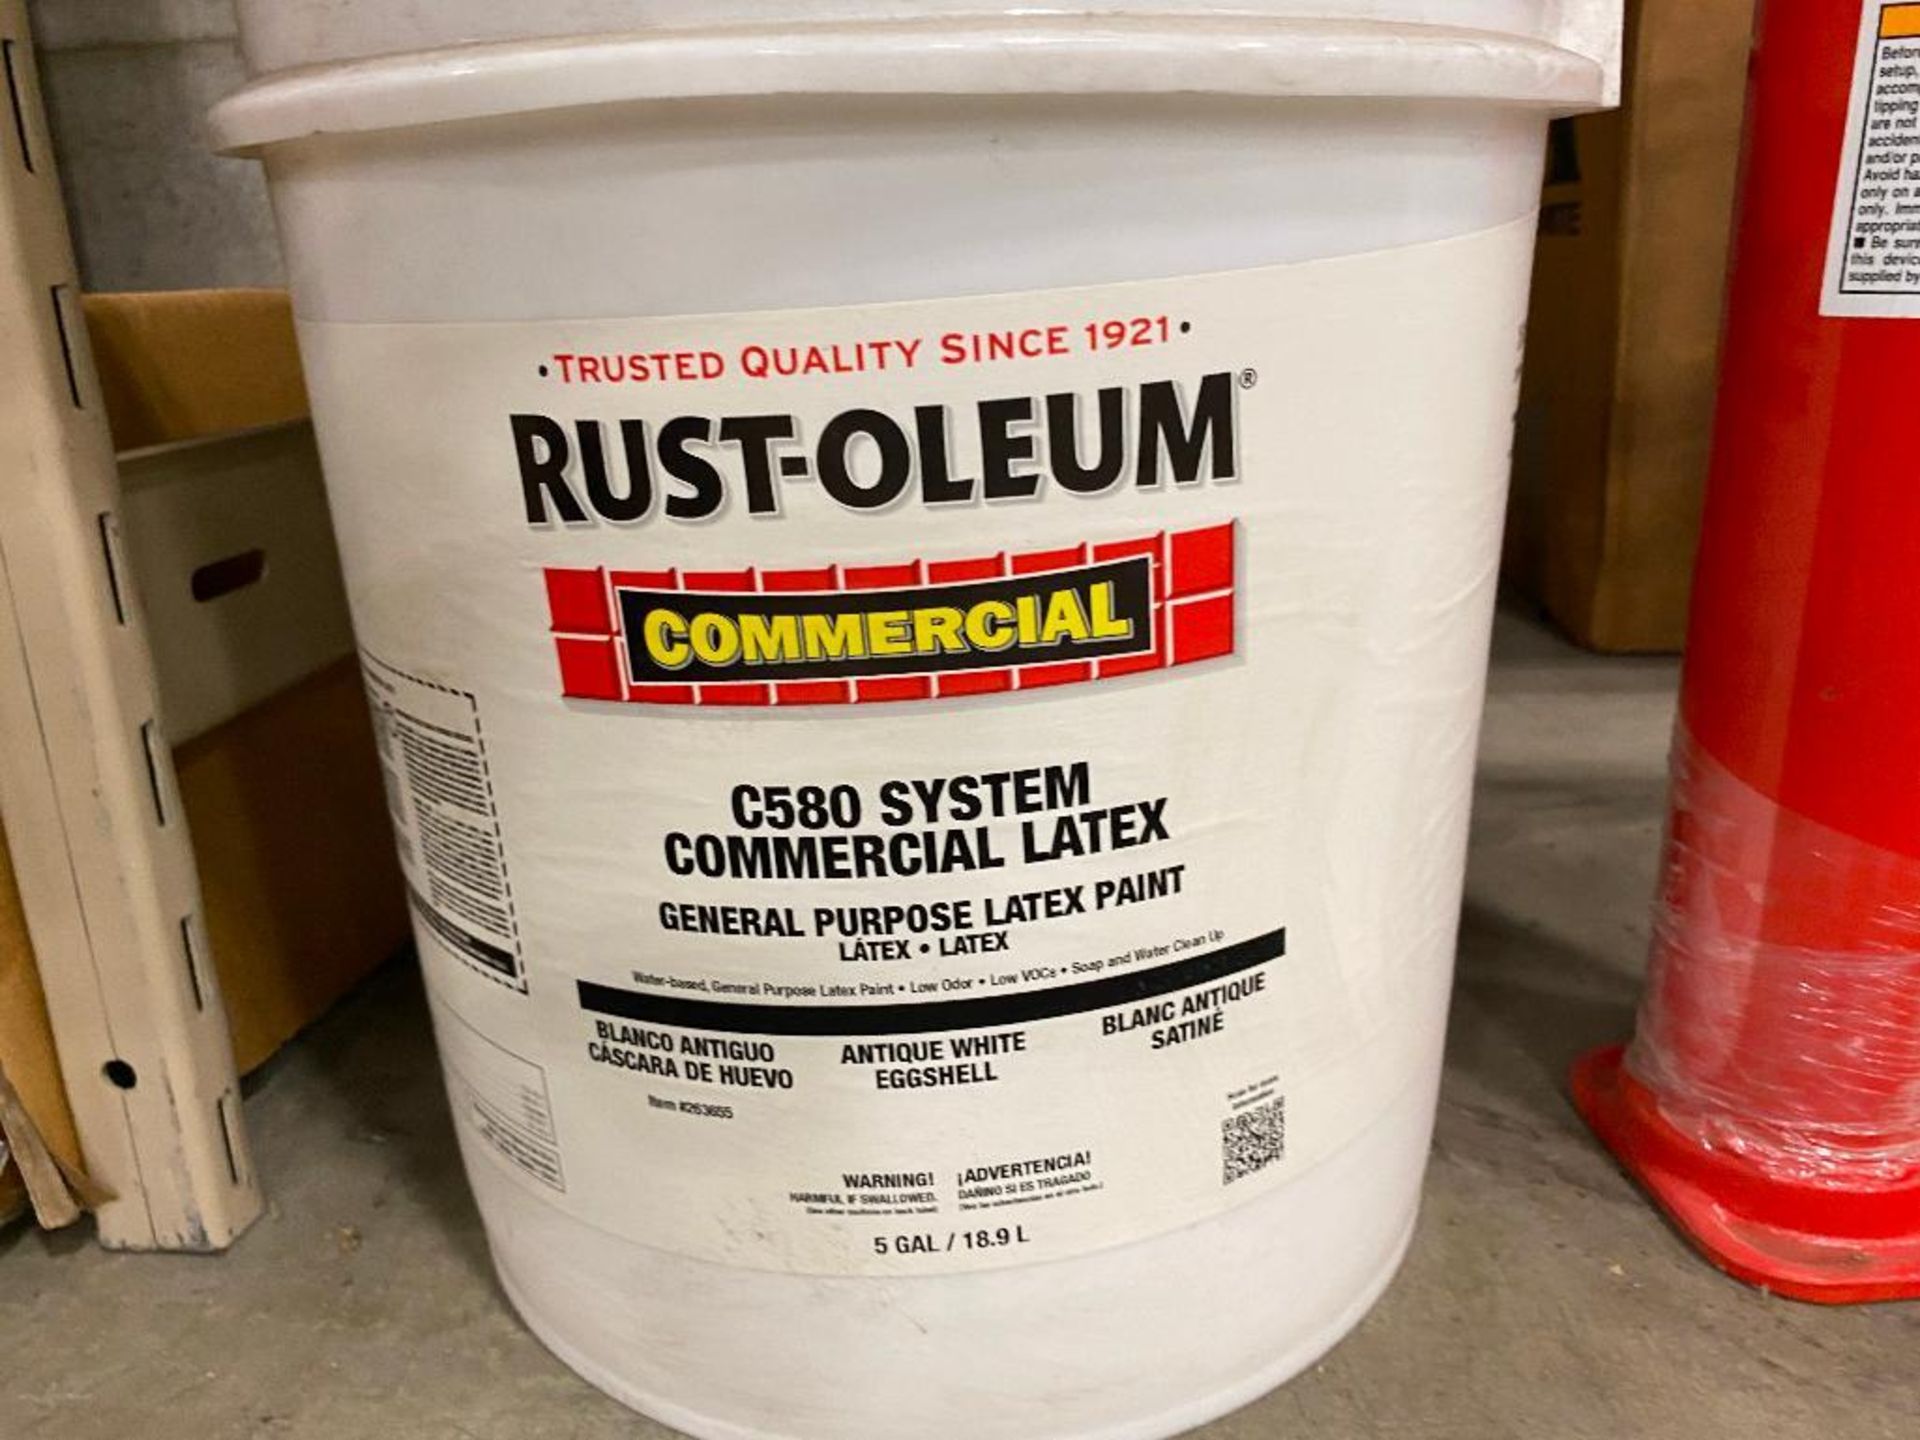 Lot of Rust-oleum Water Based Epoxy and Latex Paint - Image 4 of 4